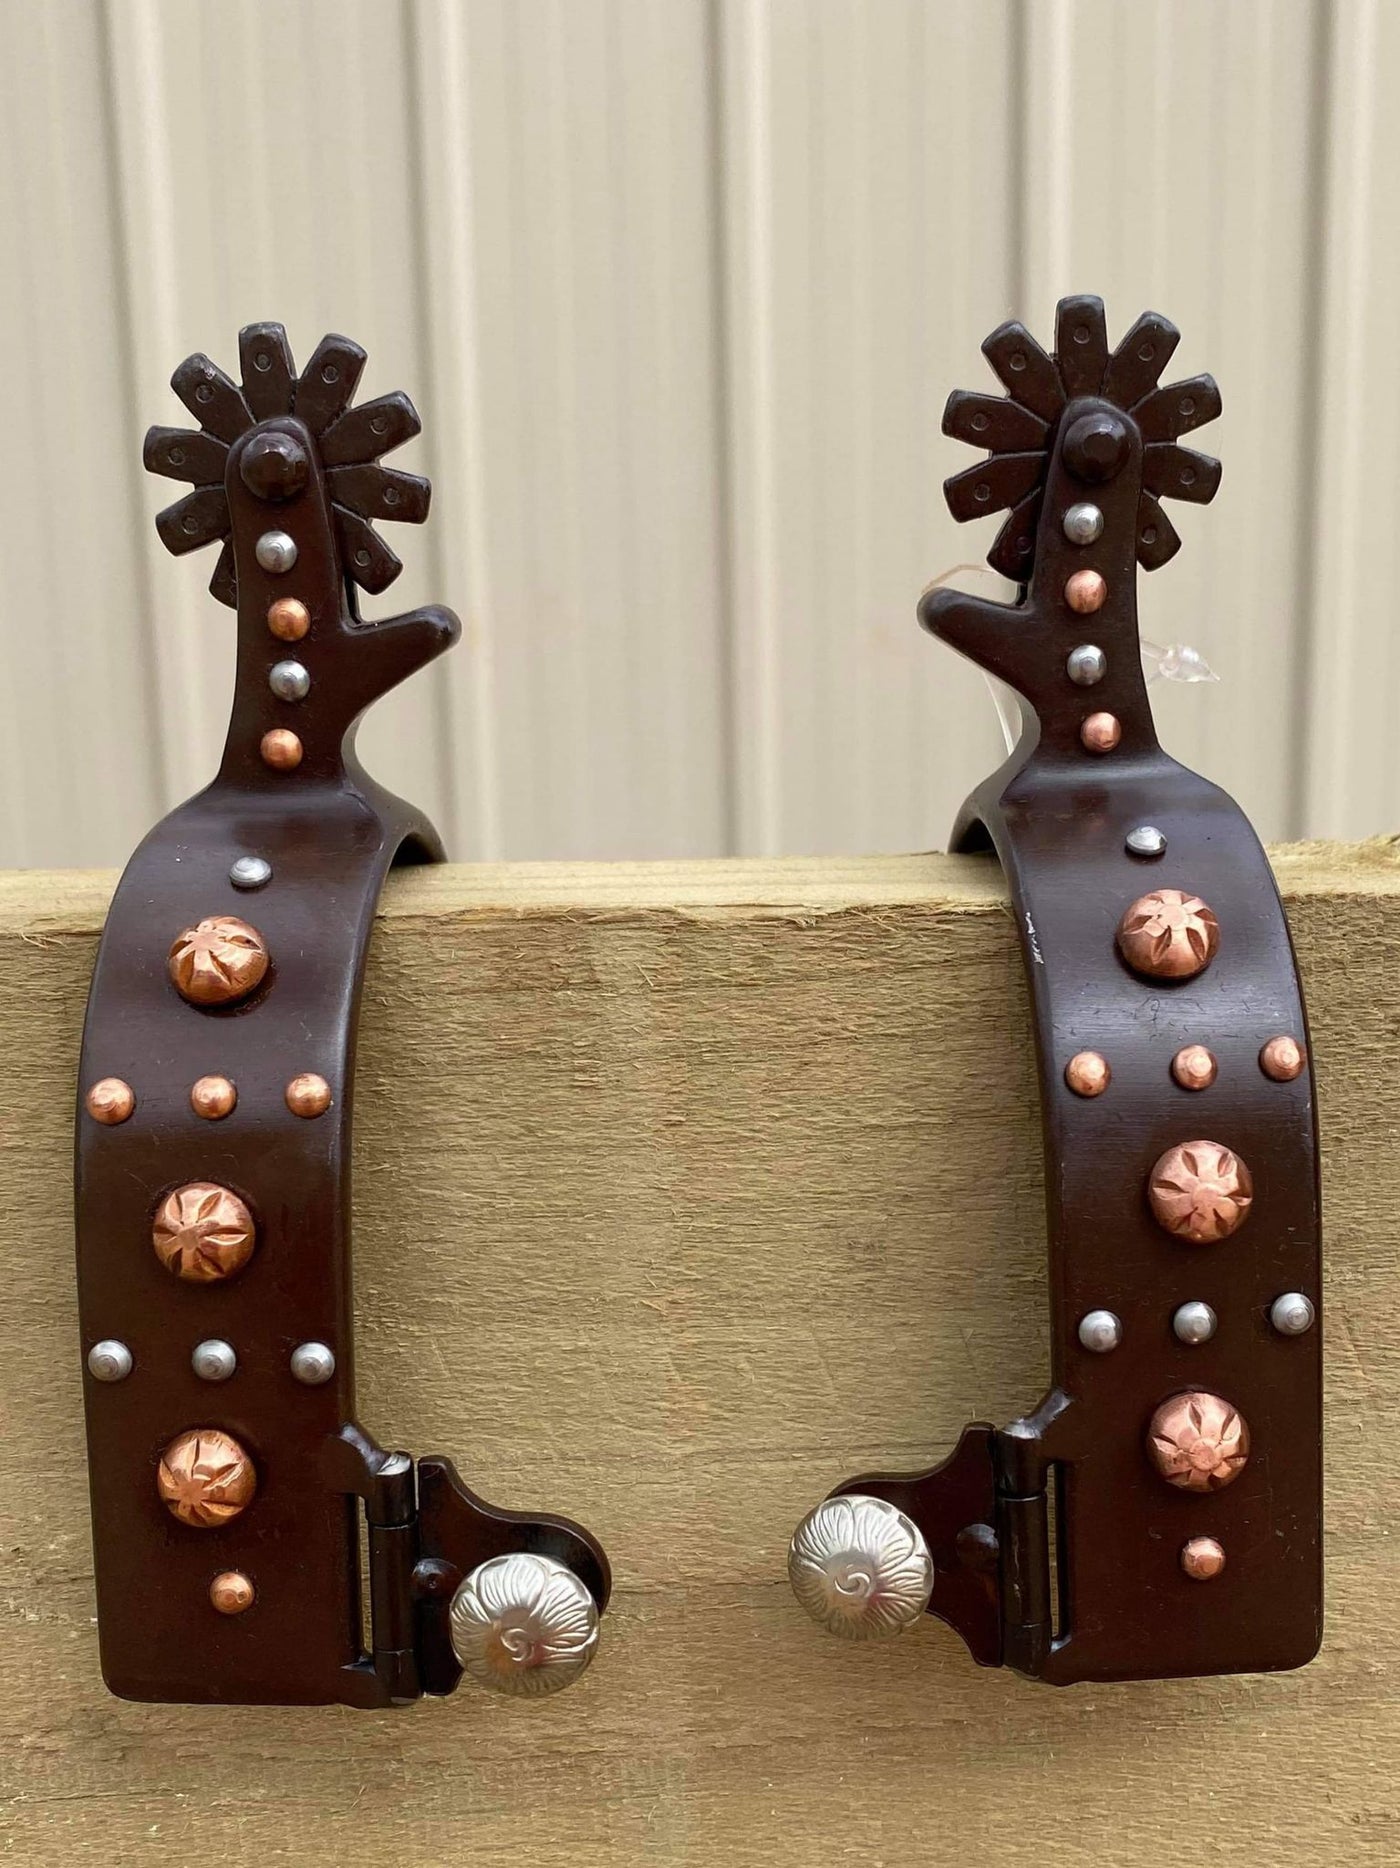 Spurs - Brown steel spur with engraved copper studs and silver stud